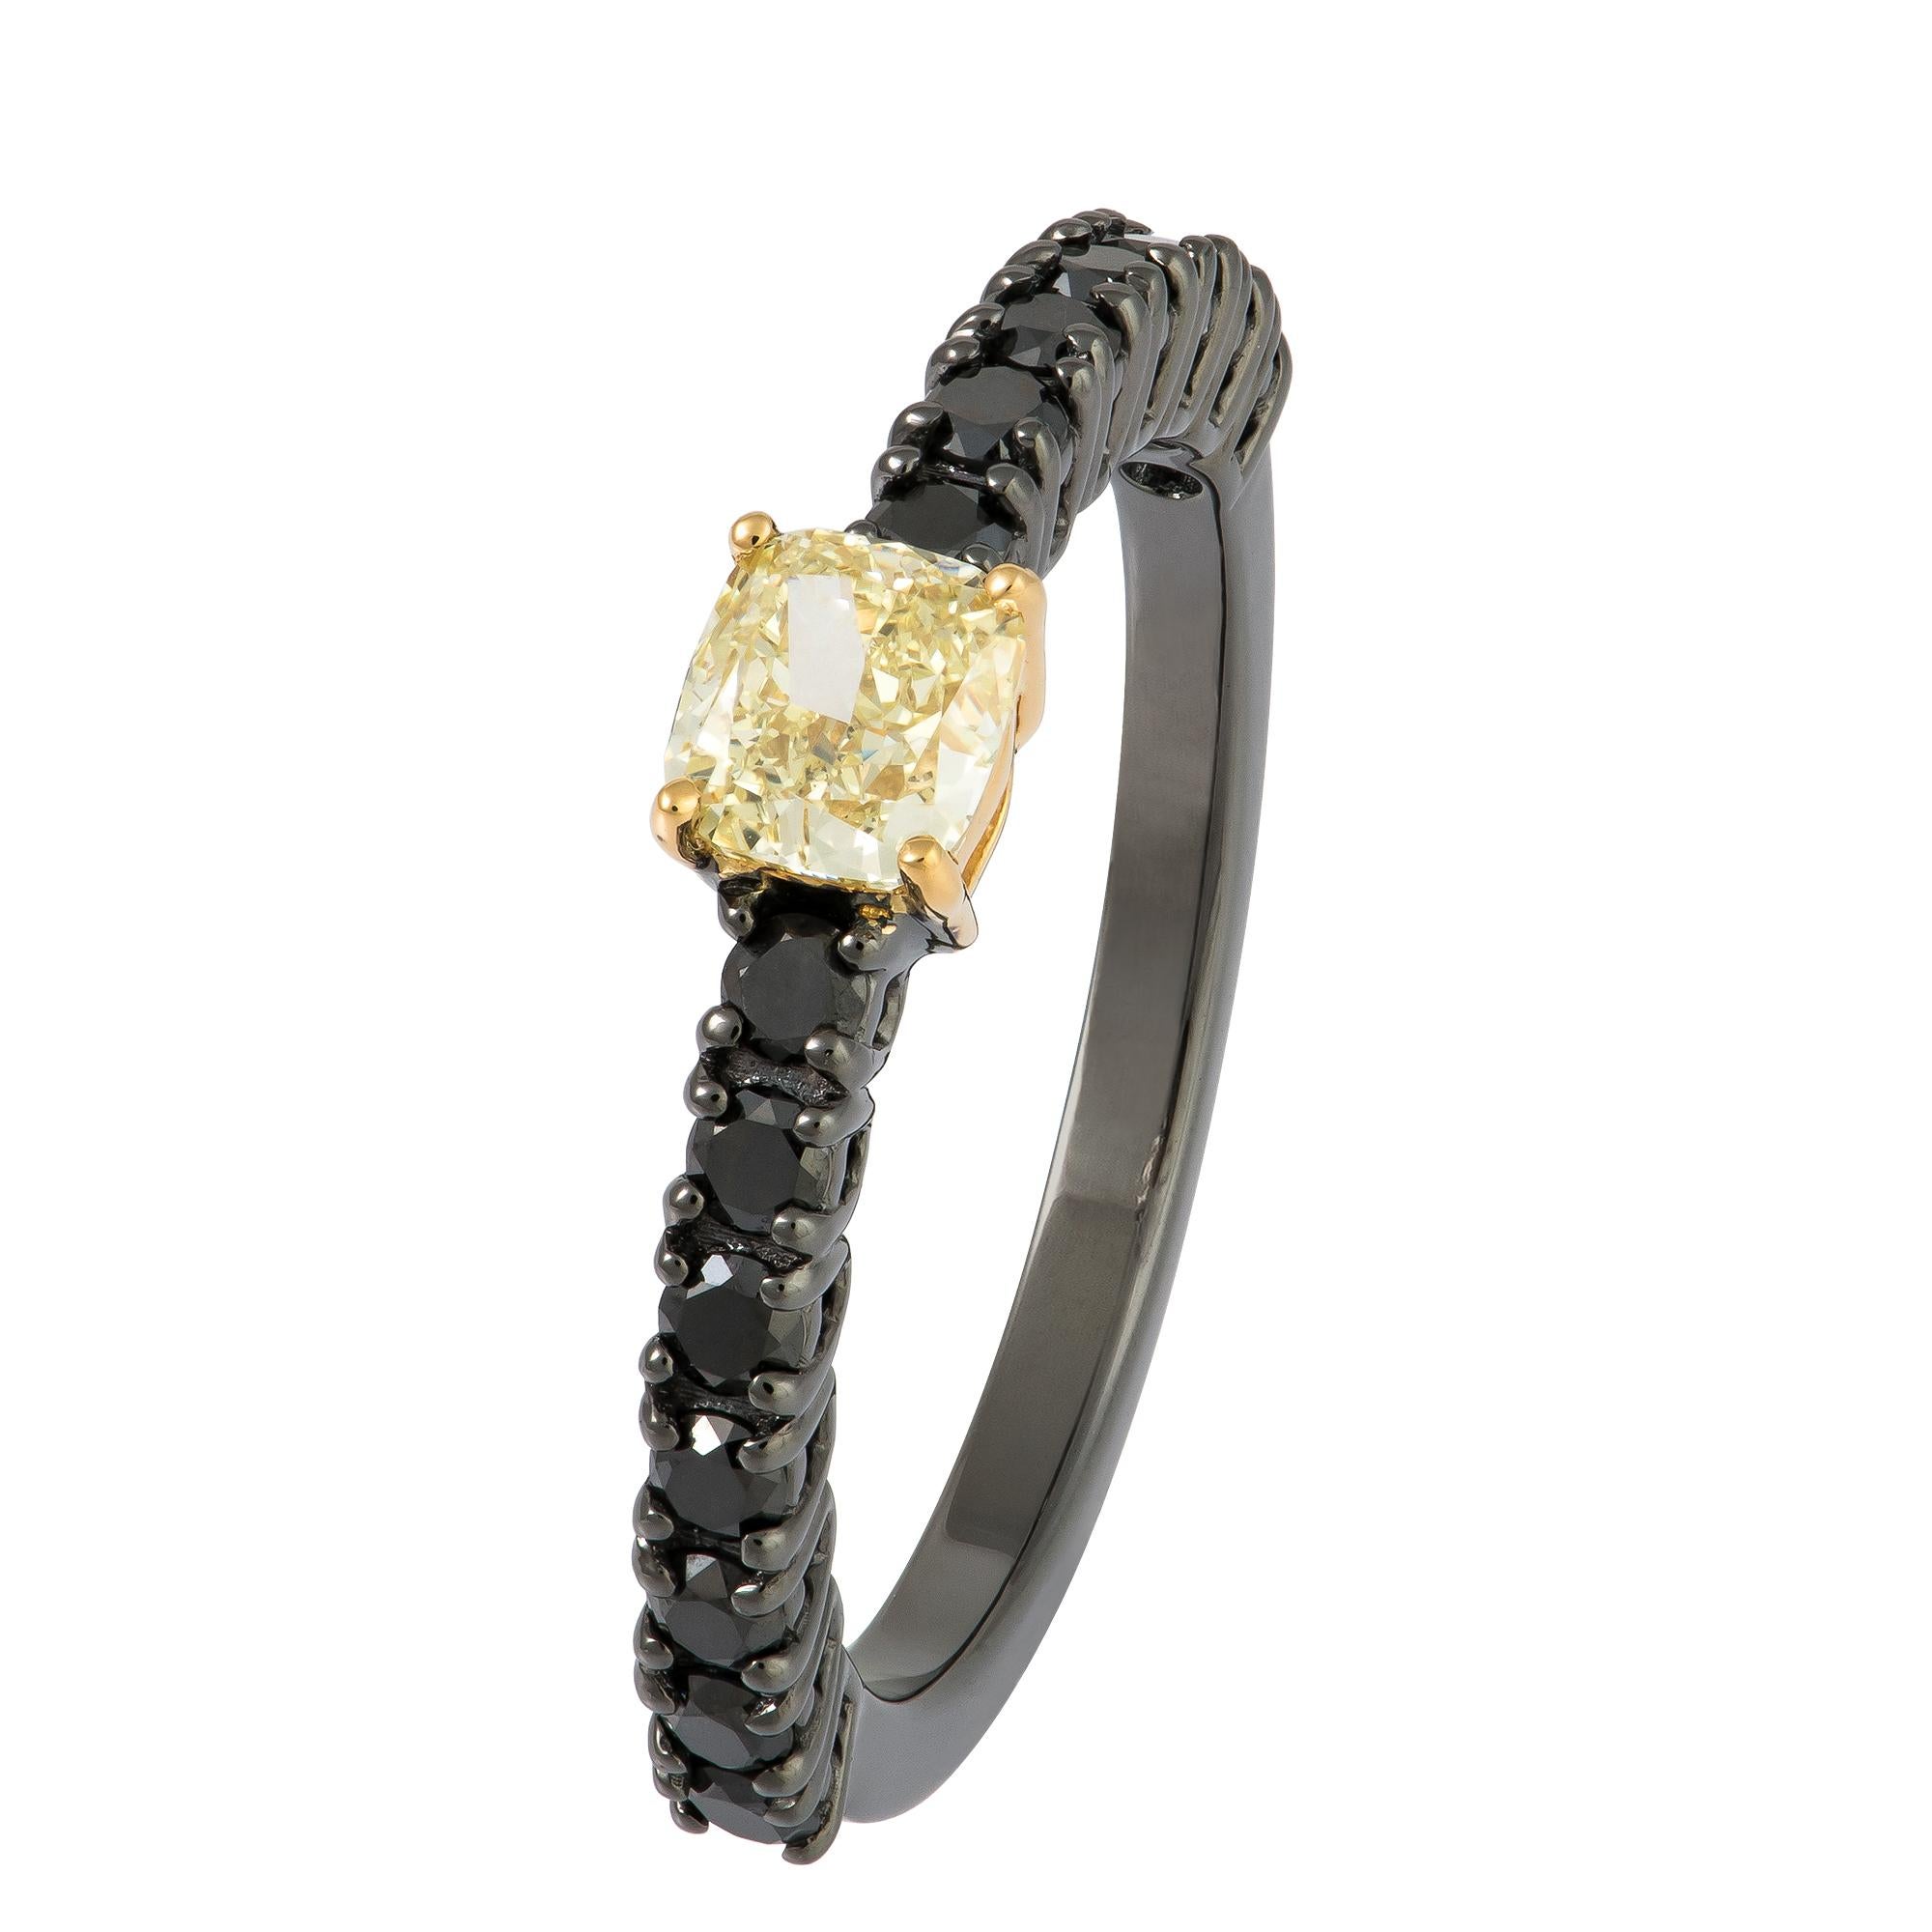 The Following Item we are offering is a Rare 18KT Gold Rare Fancy Yellow Diamond Black Diamond Ring. Beautifully comprised of Finely Set Gorgeous Yellow Diamond and adorned with Shimmering Black Diamonds!! T.C.W. Approx 1CT.  This Gorgeous Ring is a